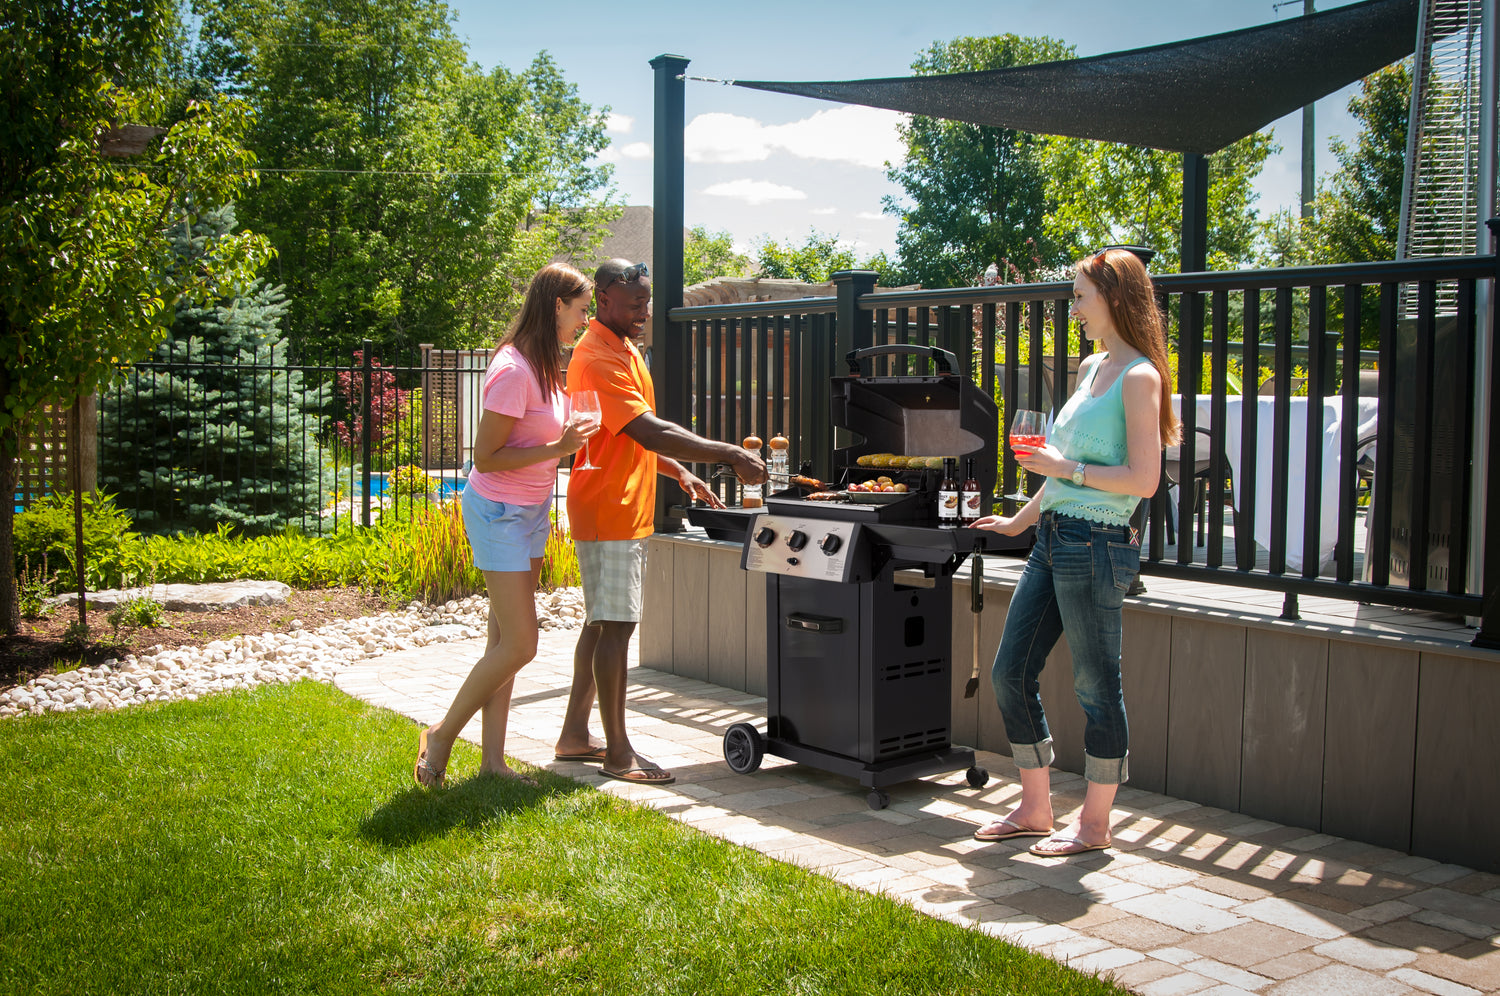 Grill This Summer With The Broil King Monarch 320 - Natural Gas | Barbecues Galore: Burlington, Oakville, Etobicoke & Calgary